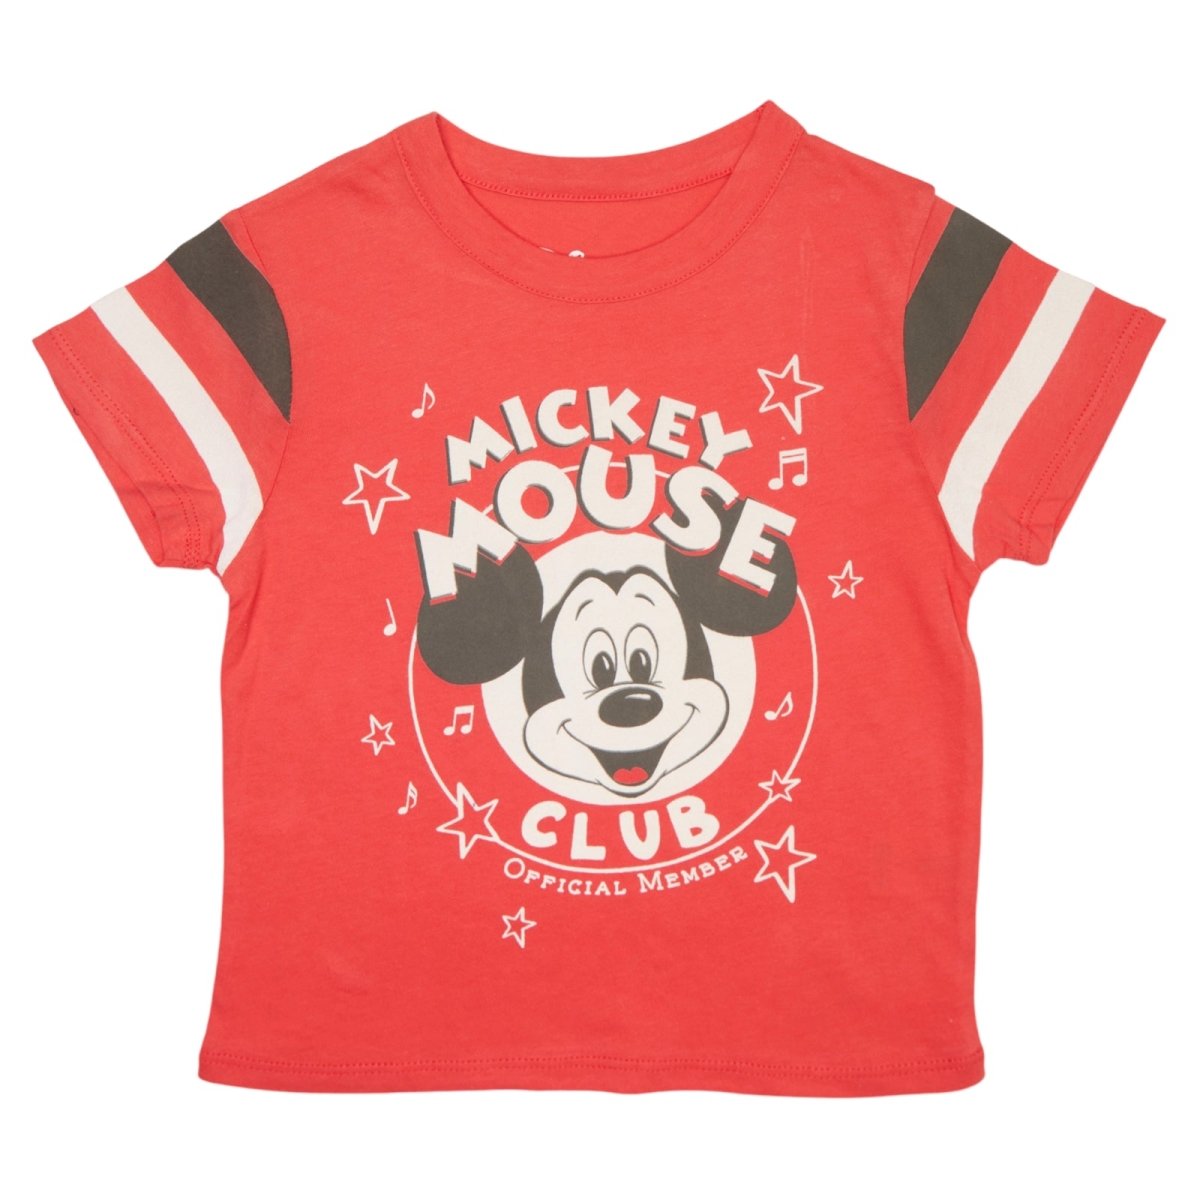 MICKEY MOUSE CLUB TSHIRT - CHASER KIDS